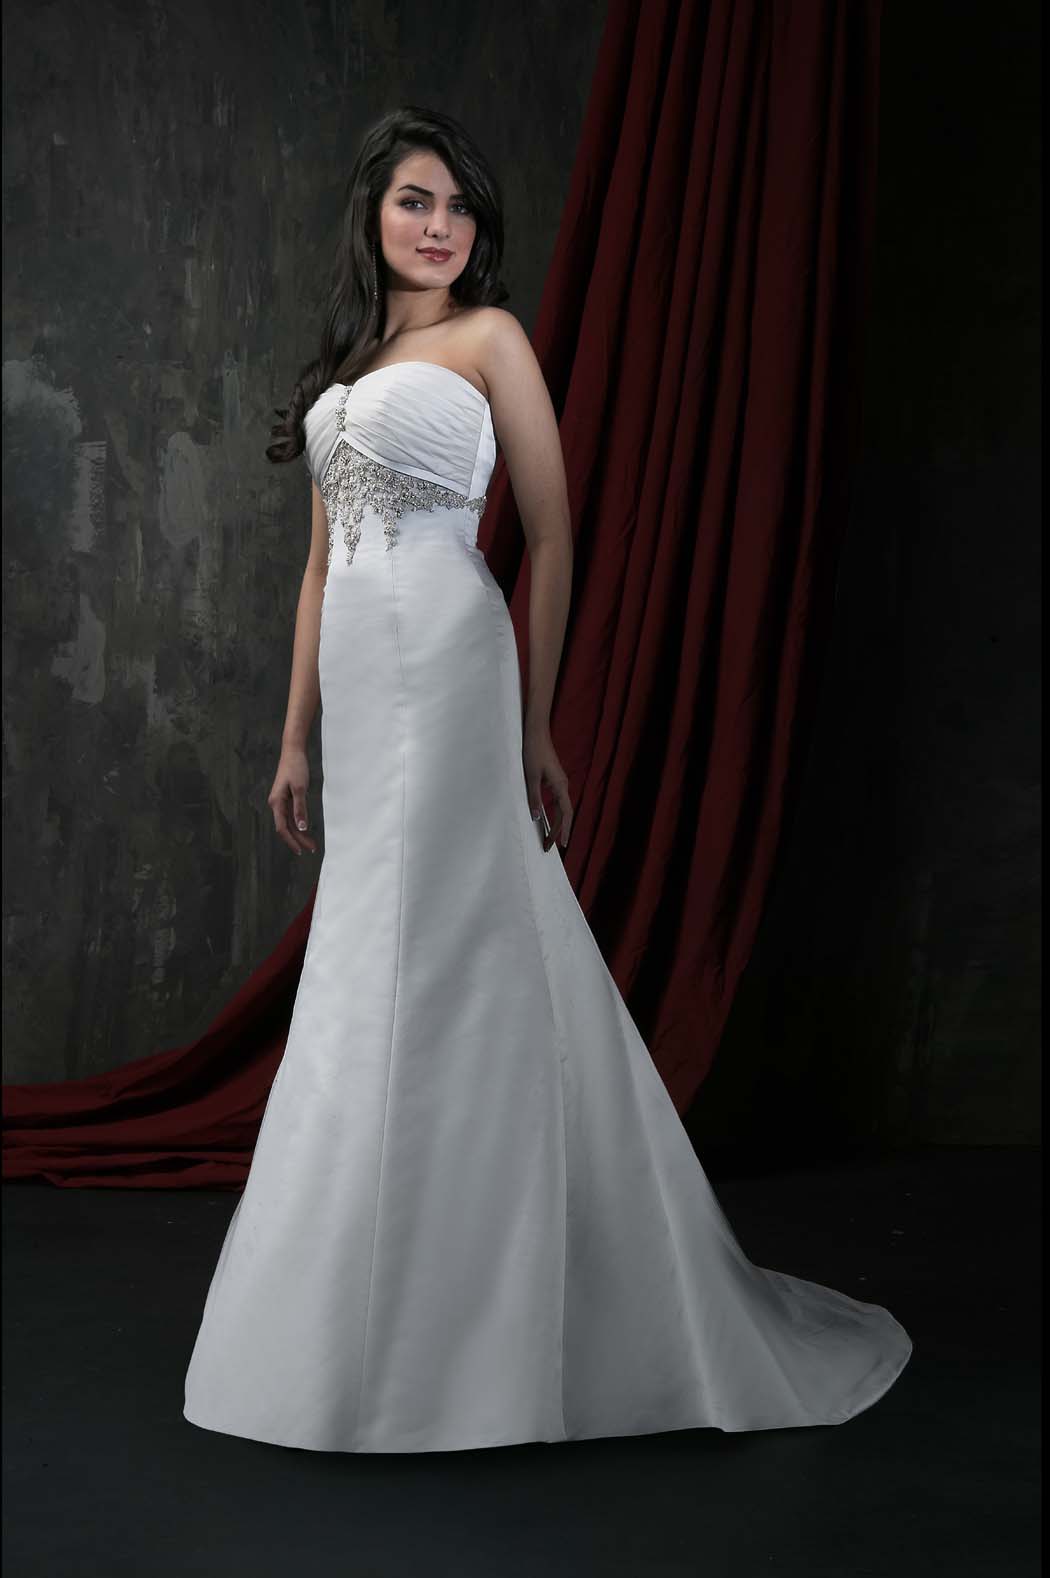 How to find the wedding gown